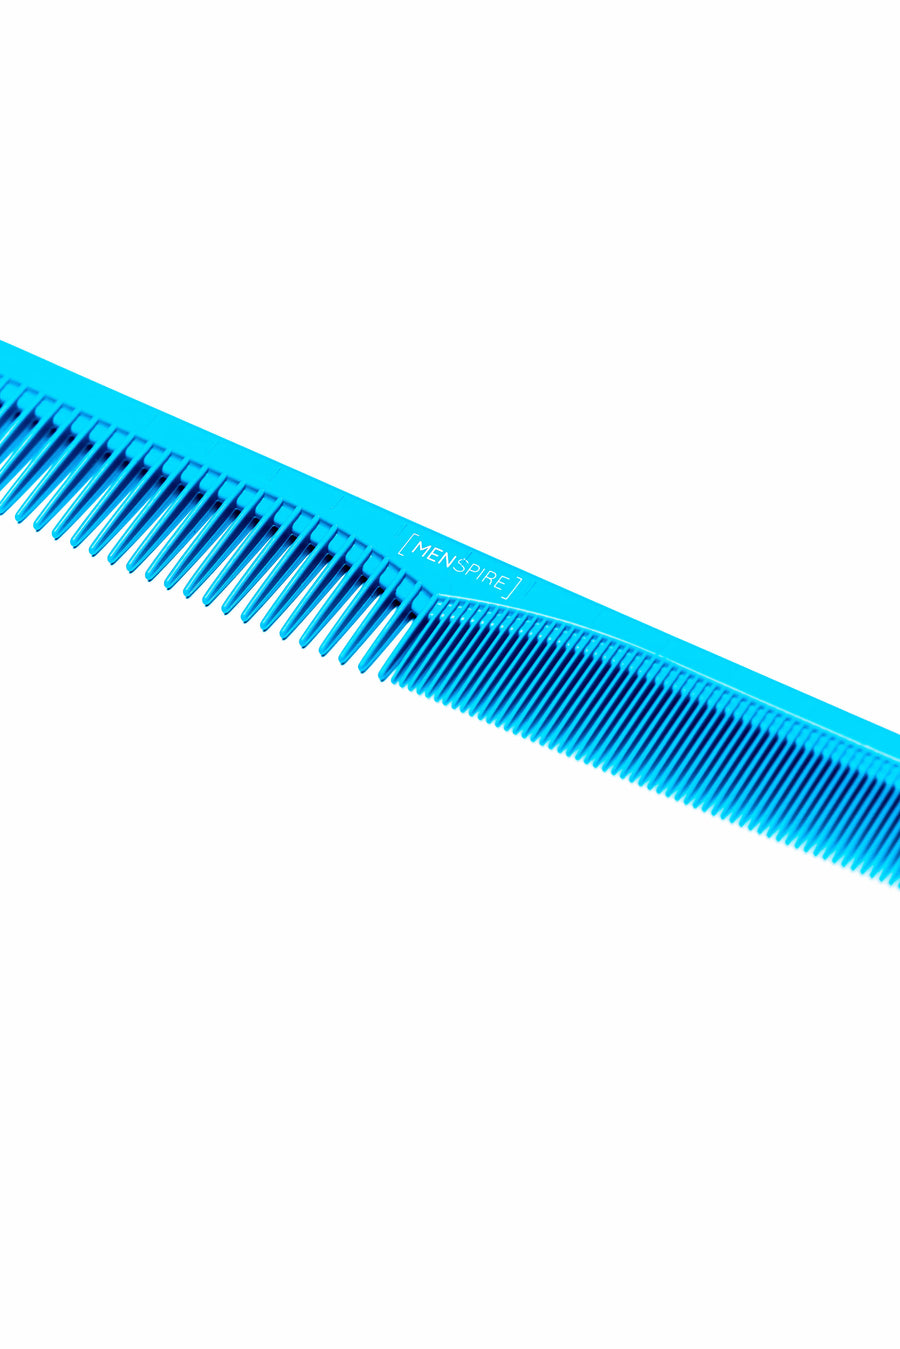 DELRIN COMB 703 - BRANDED